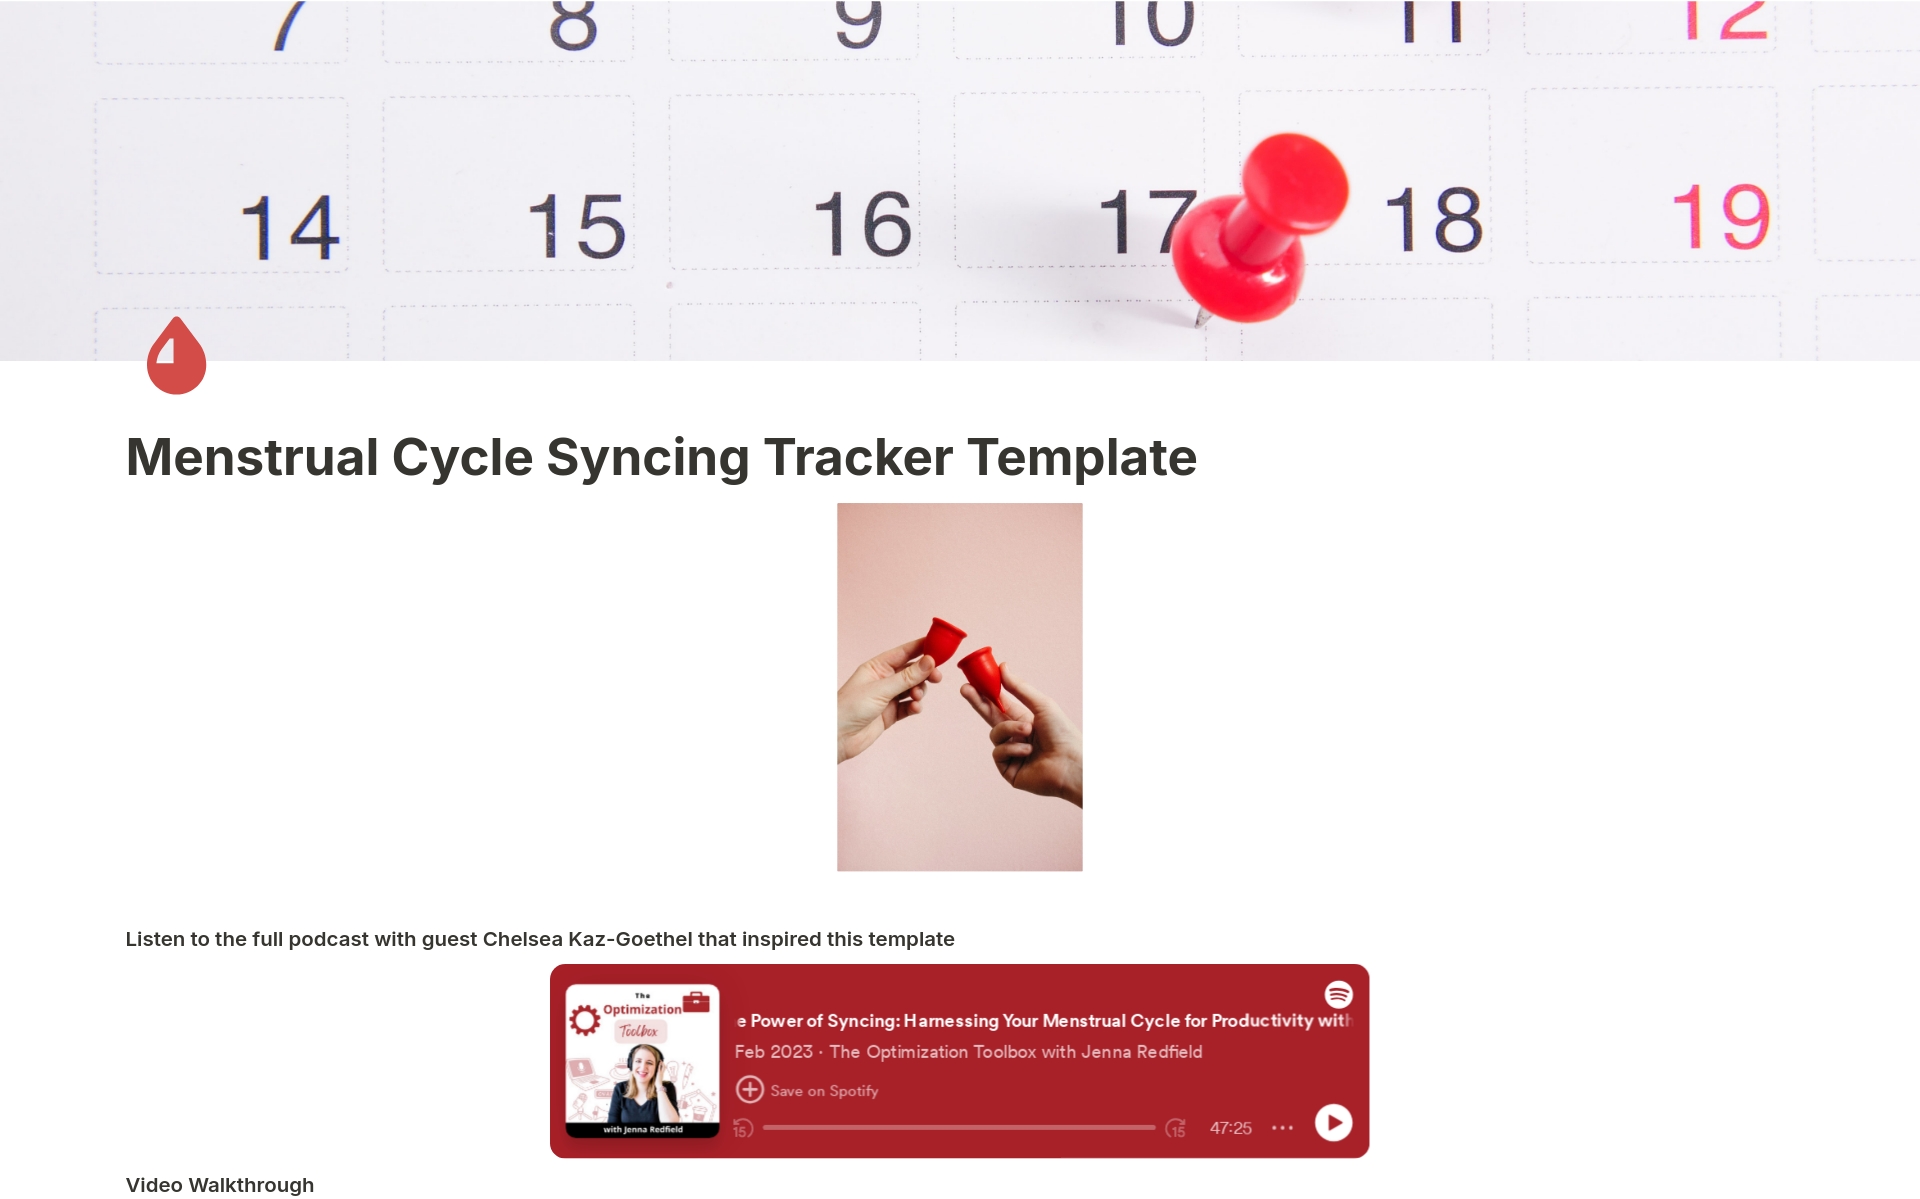 Track the 4 stages of your menstrual cycle with the menstrual cycle tracker
Works with Notion Calendar